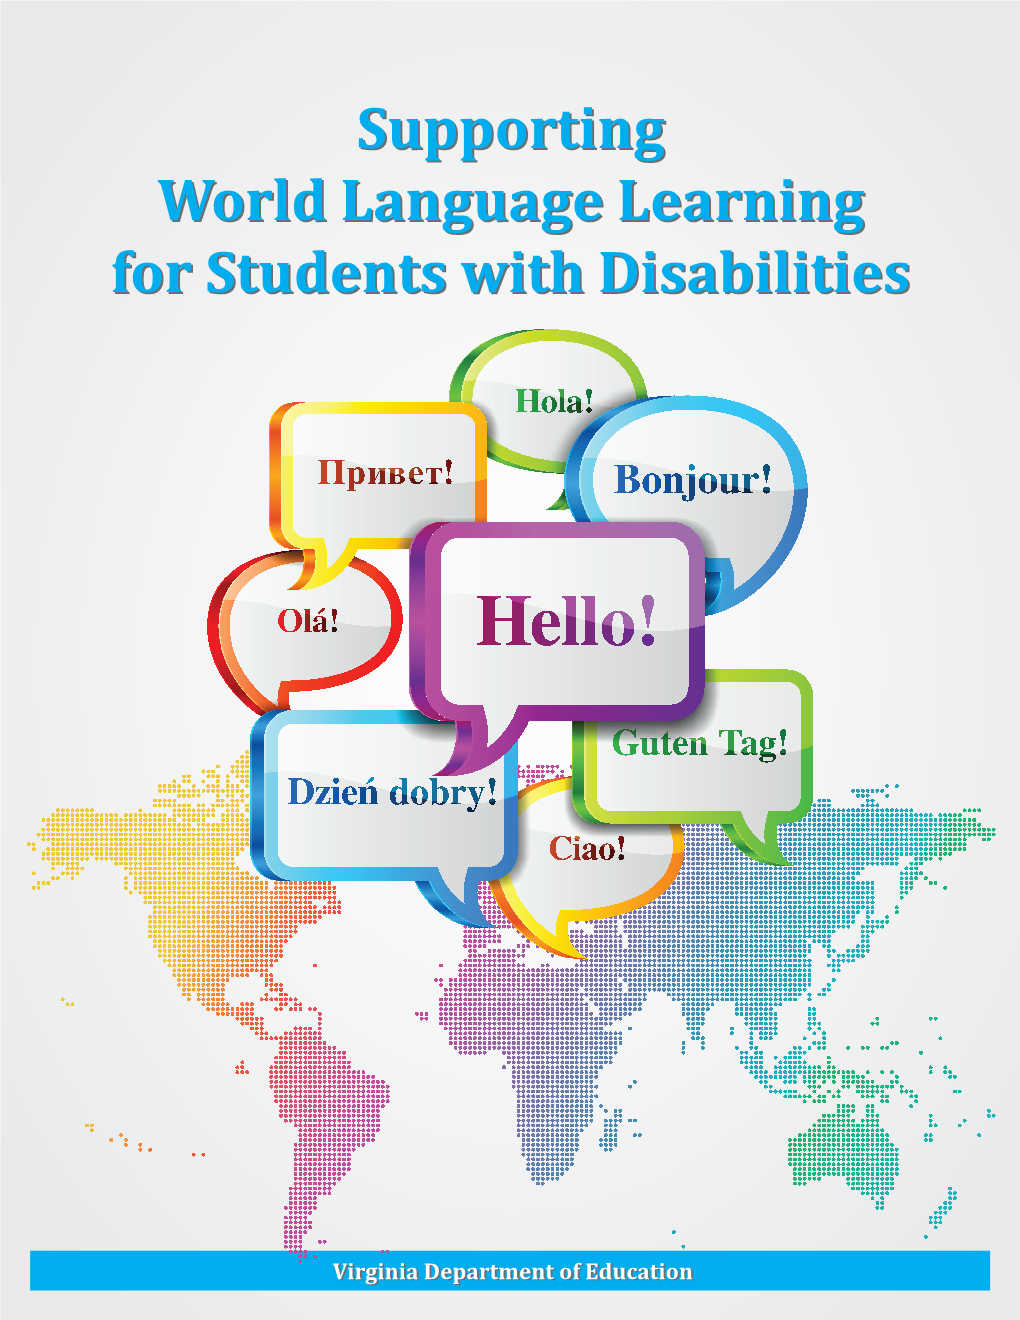 Supporting World Language Learning for Students with Disabilities